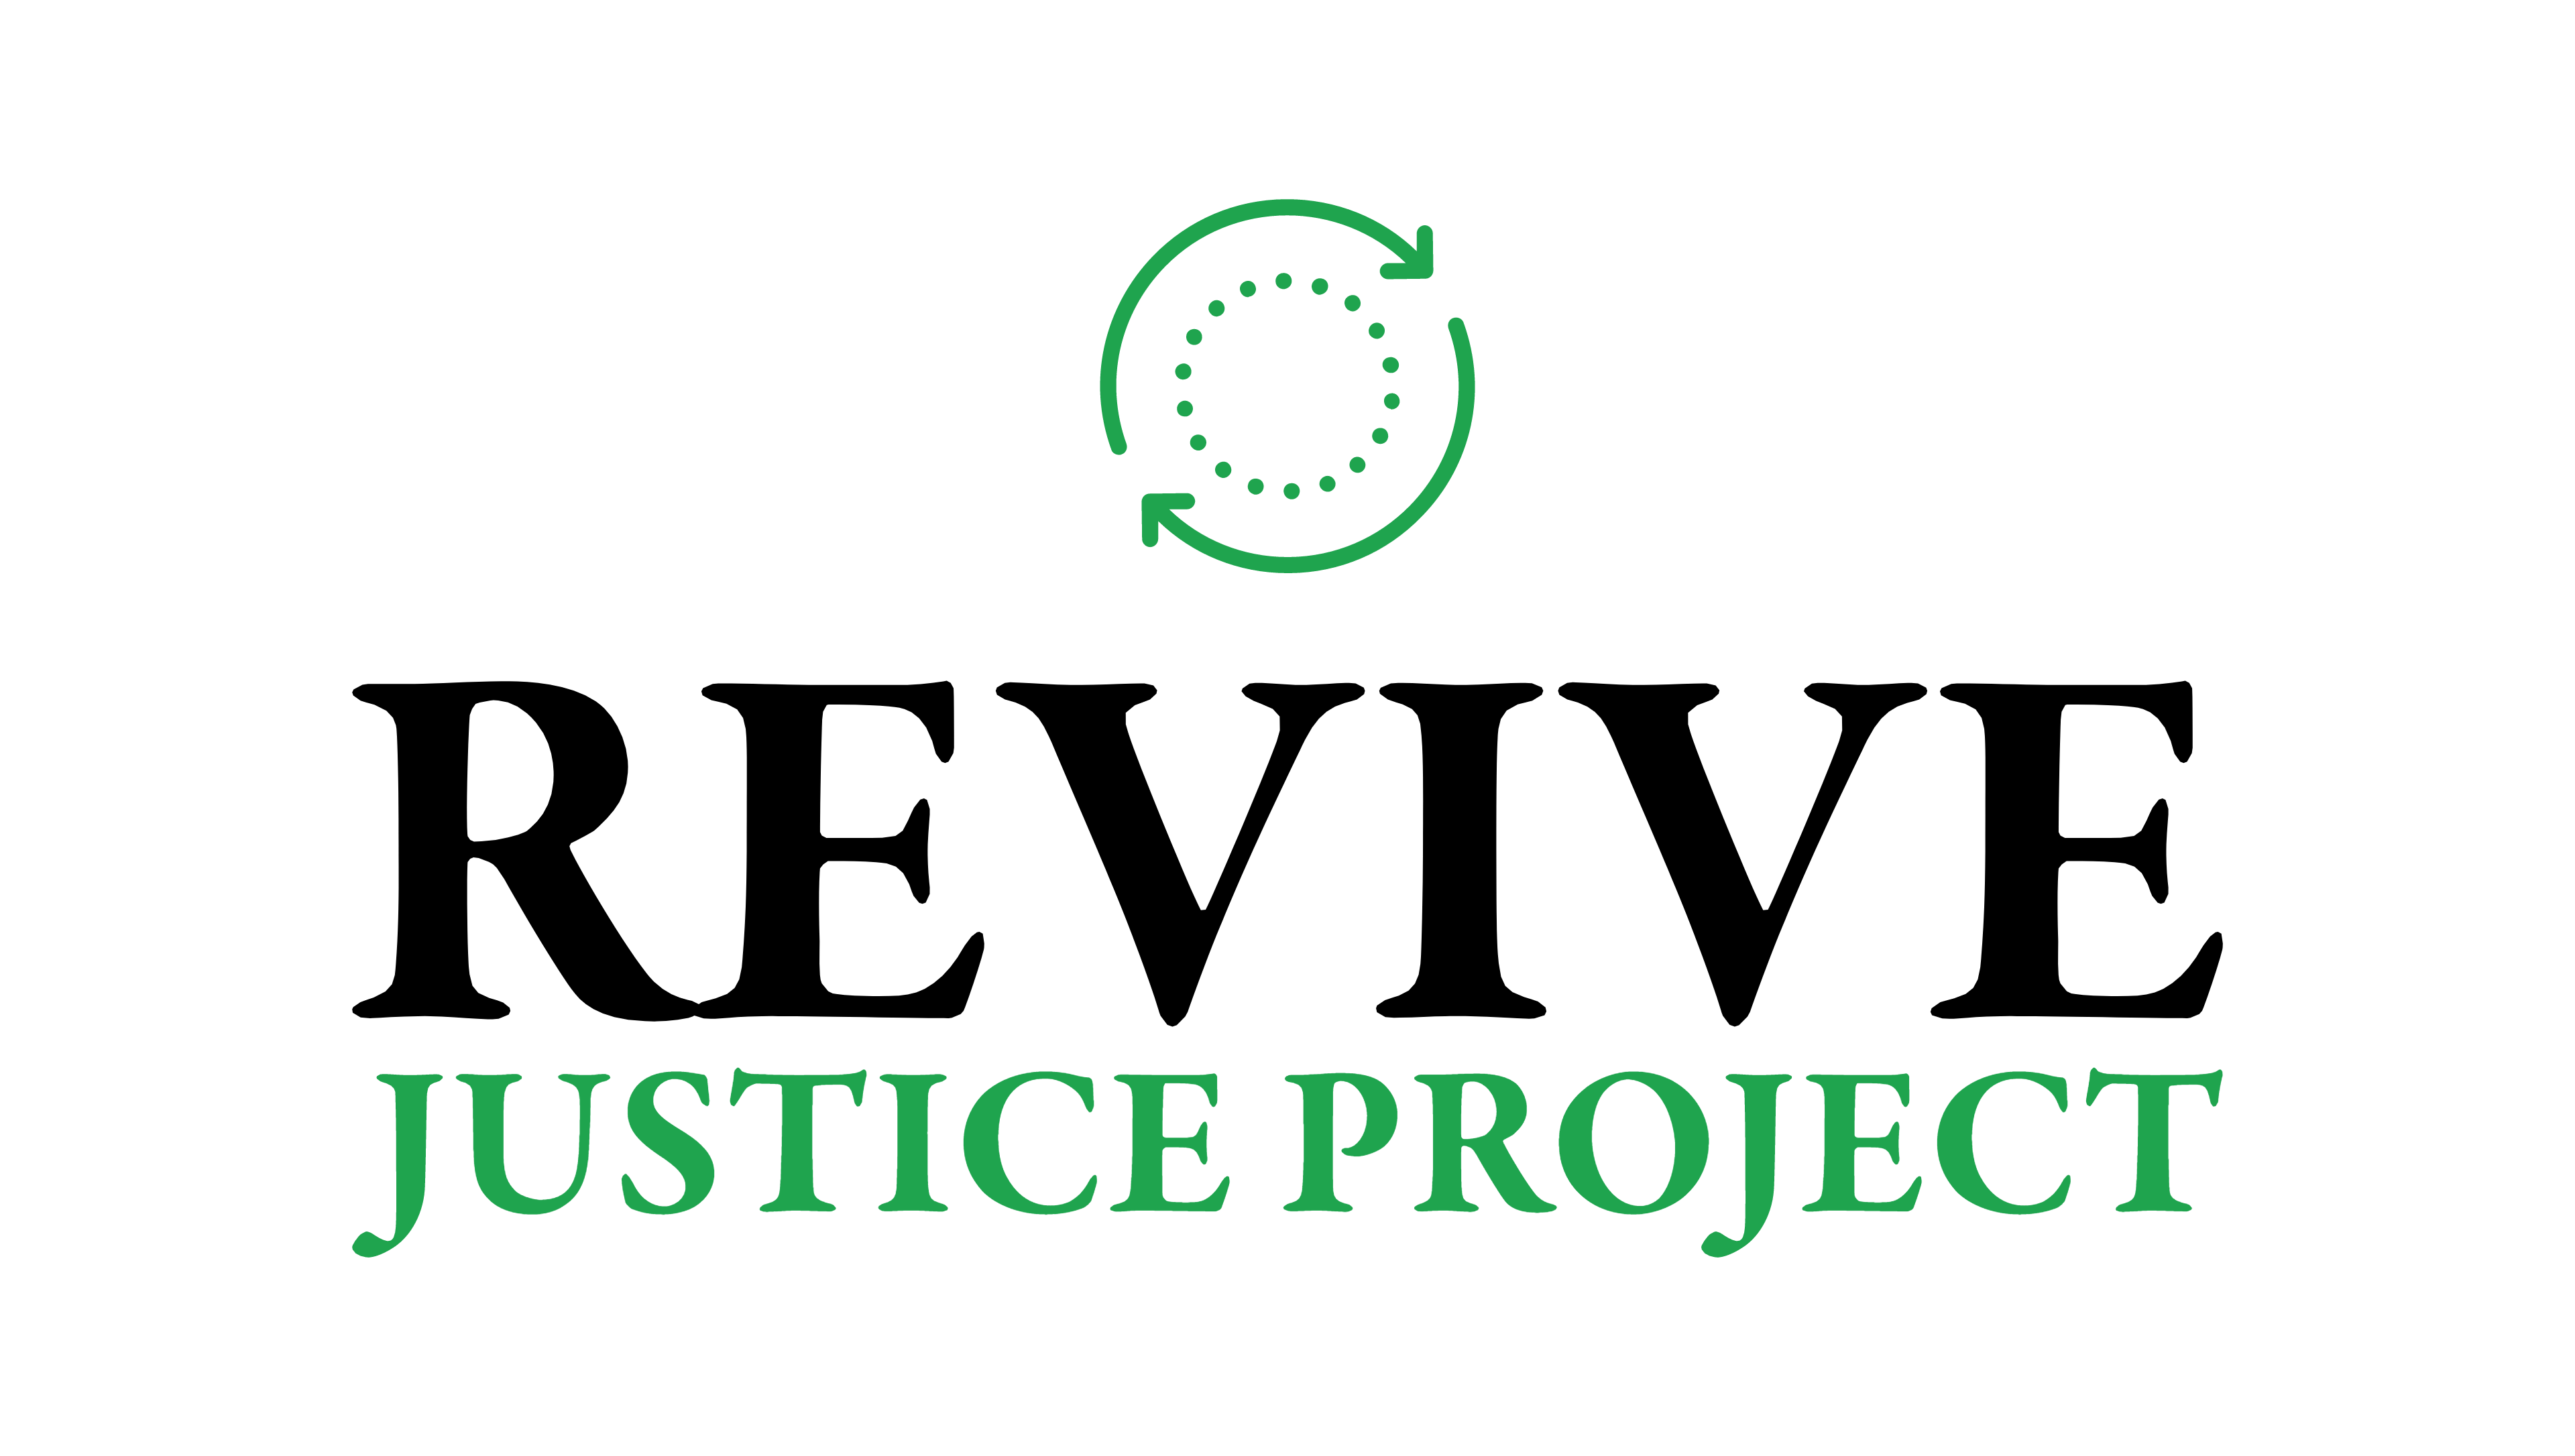 Revive Justice Project logo